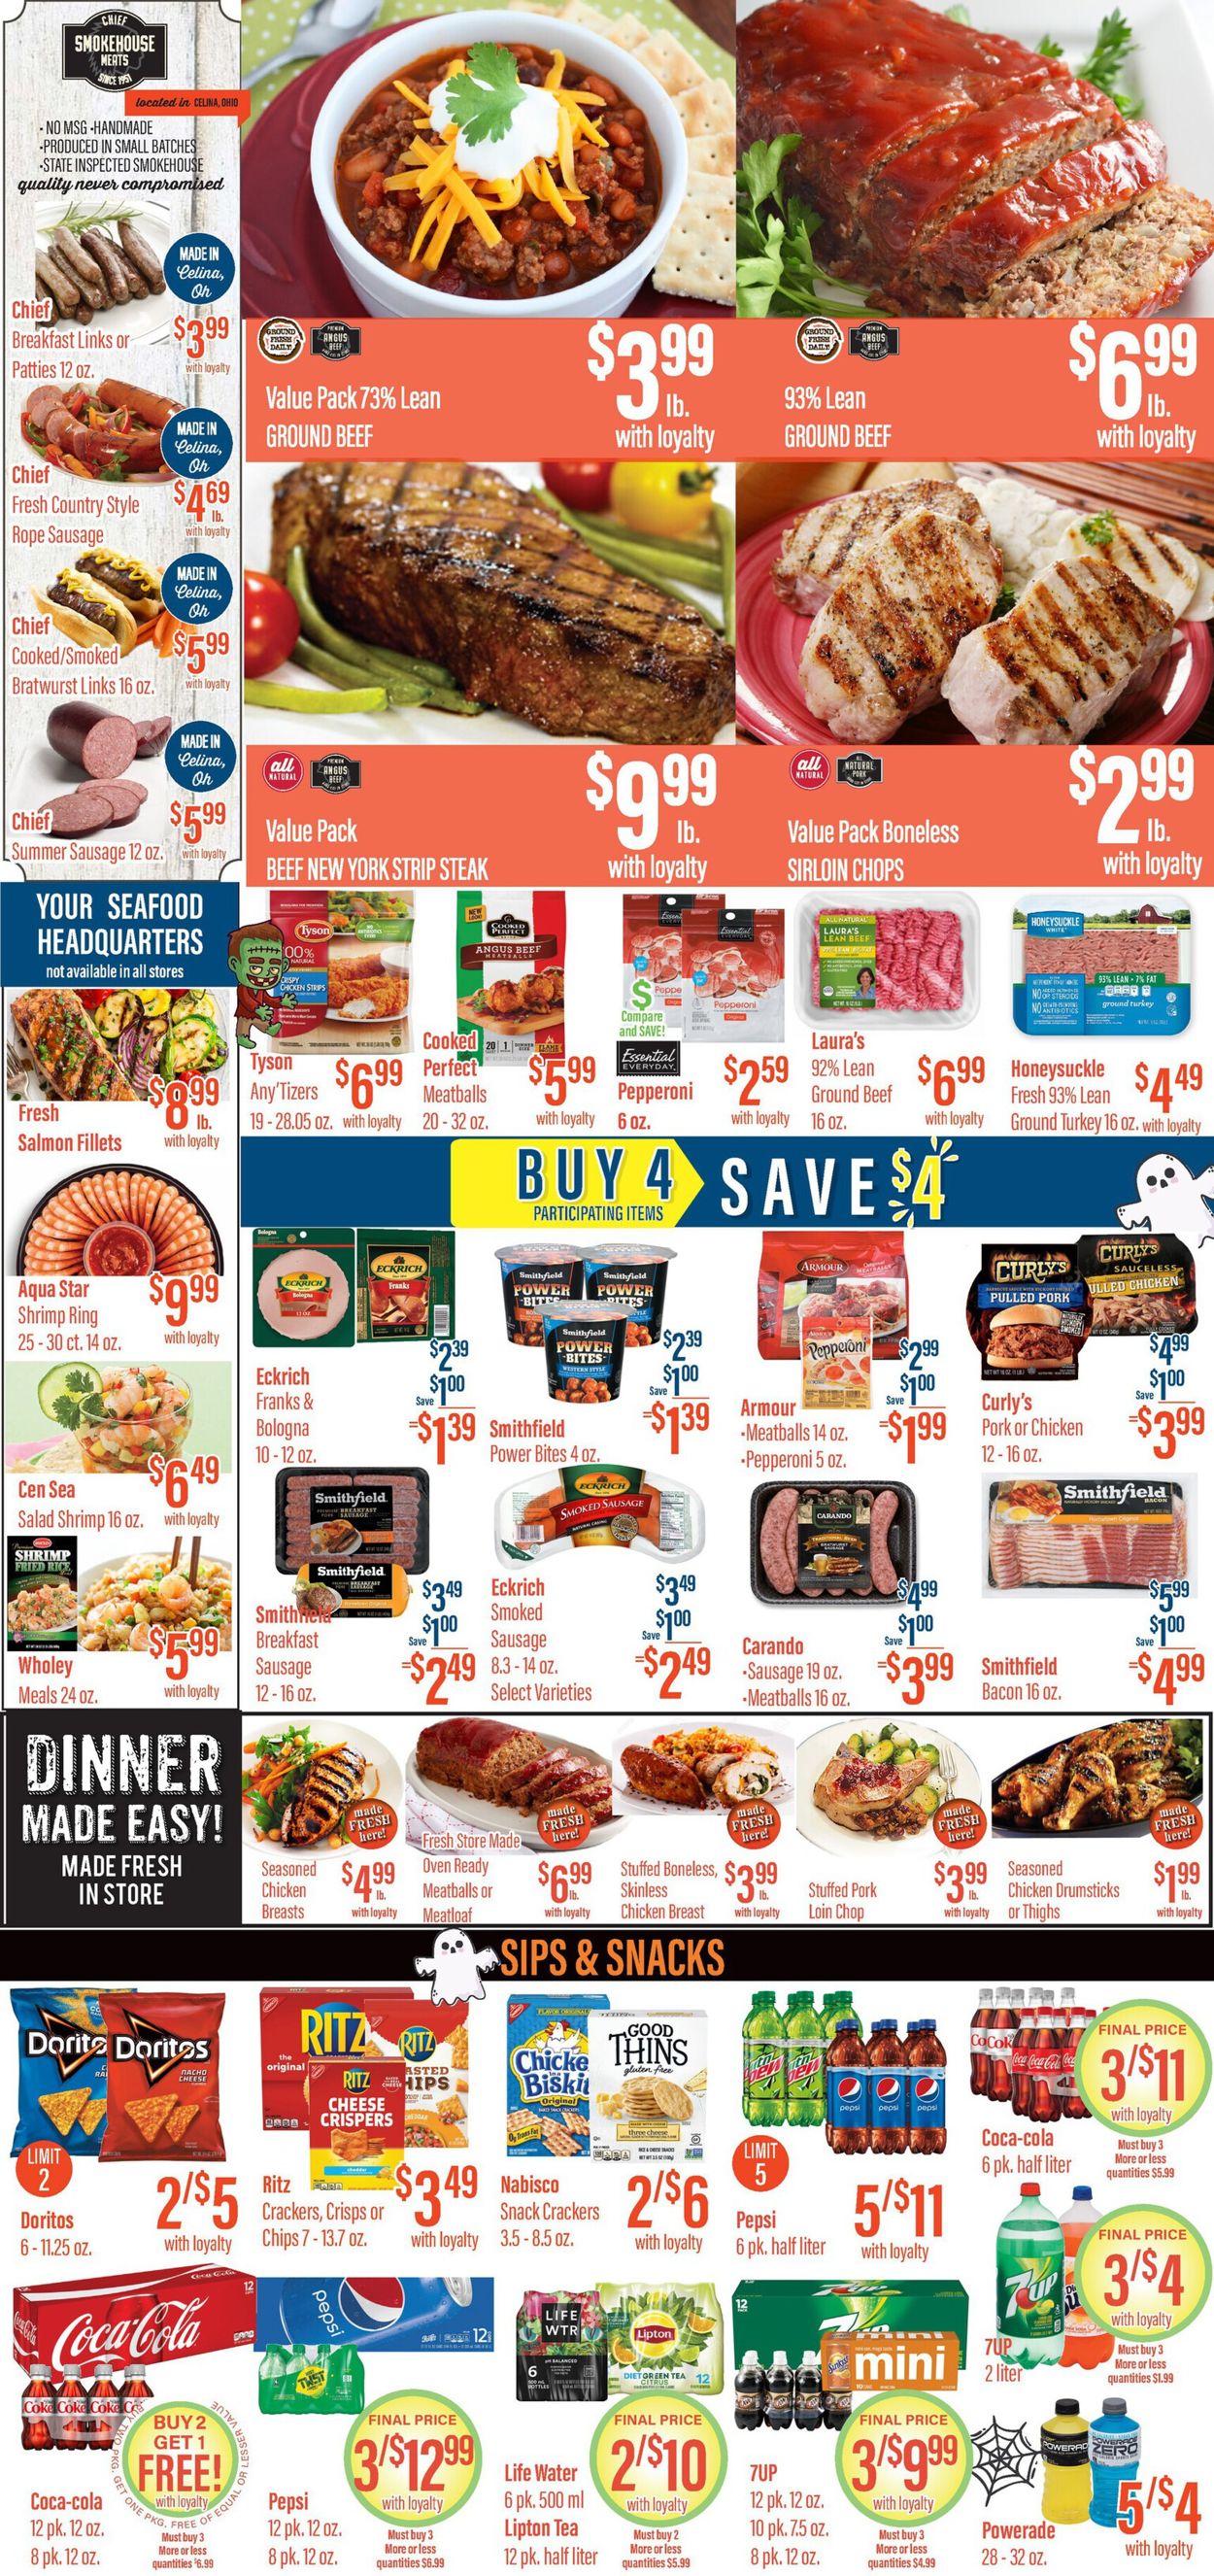 Remke Markets Ad from 10/28/2021